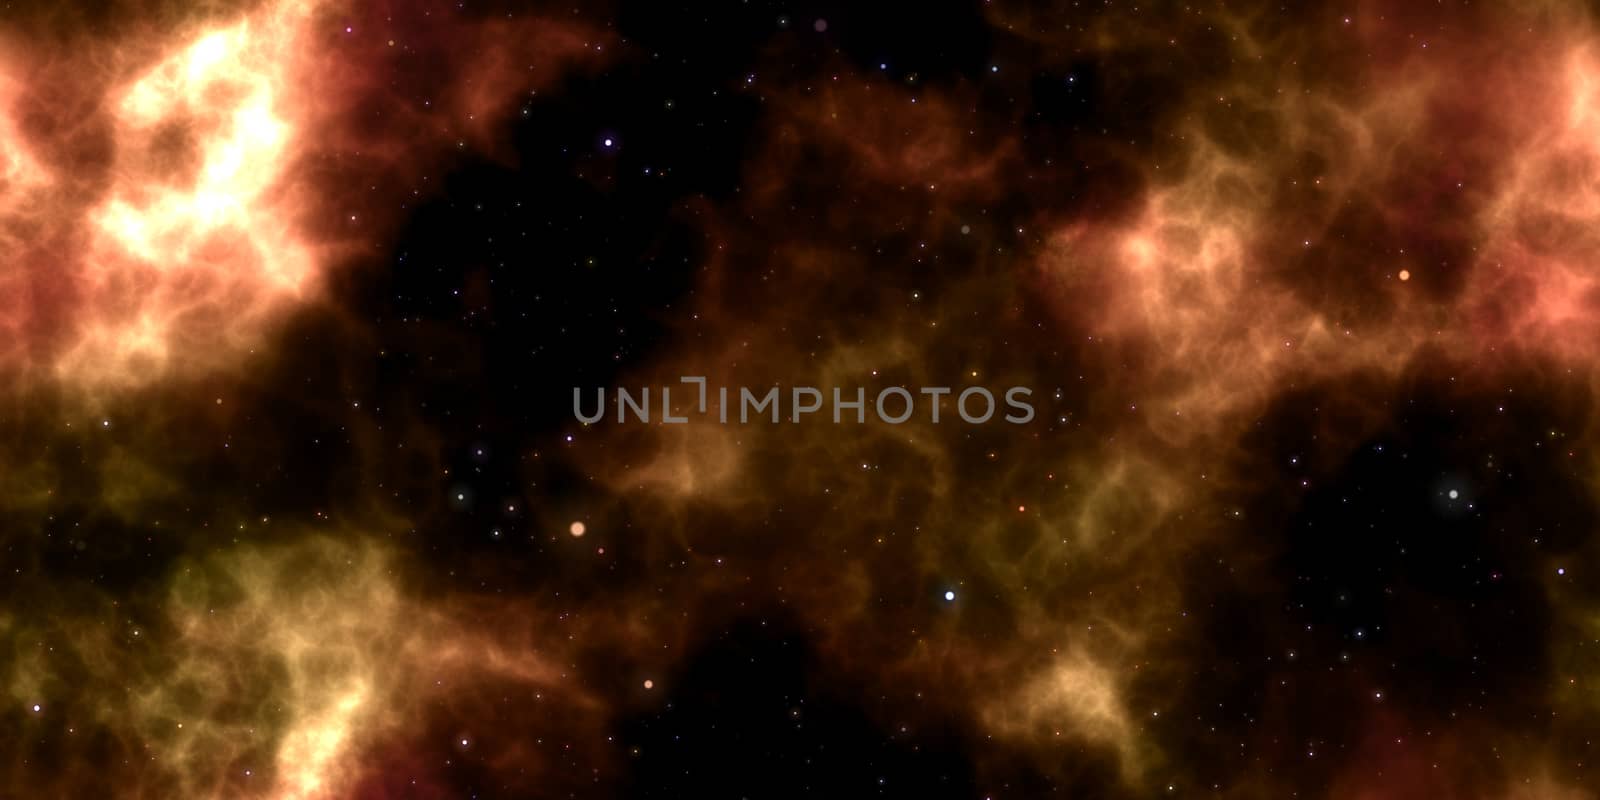 Orange Clouds on Night Sky Galaxy Background. Abstract Cosmos Infinity Texture. 3D Rendering. 3D Illustration.